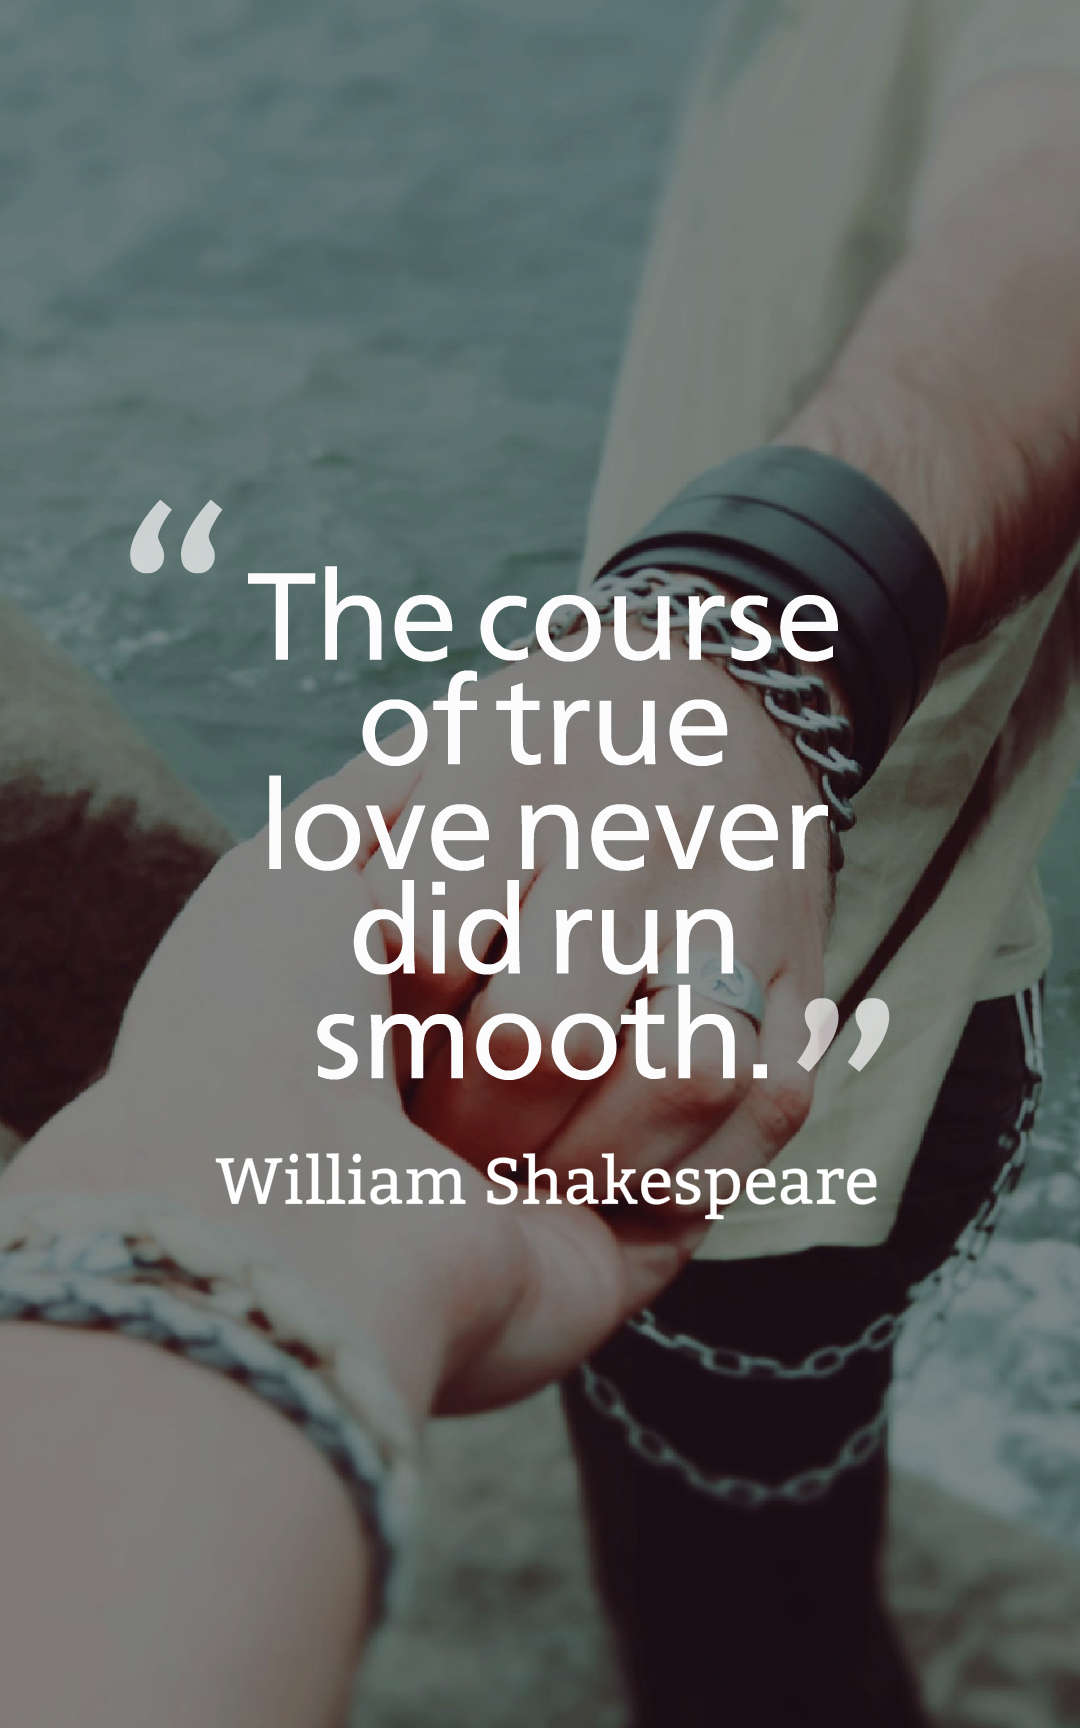 The course of true love never did run smooth.